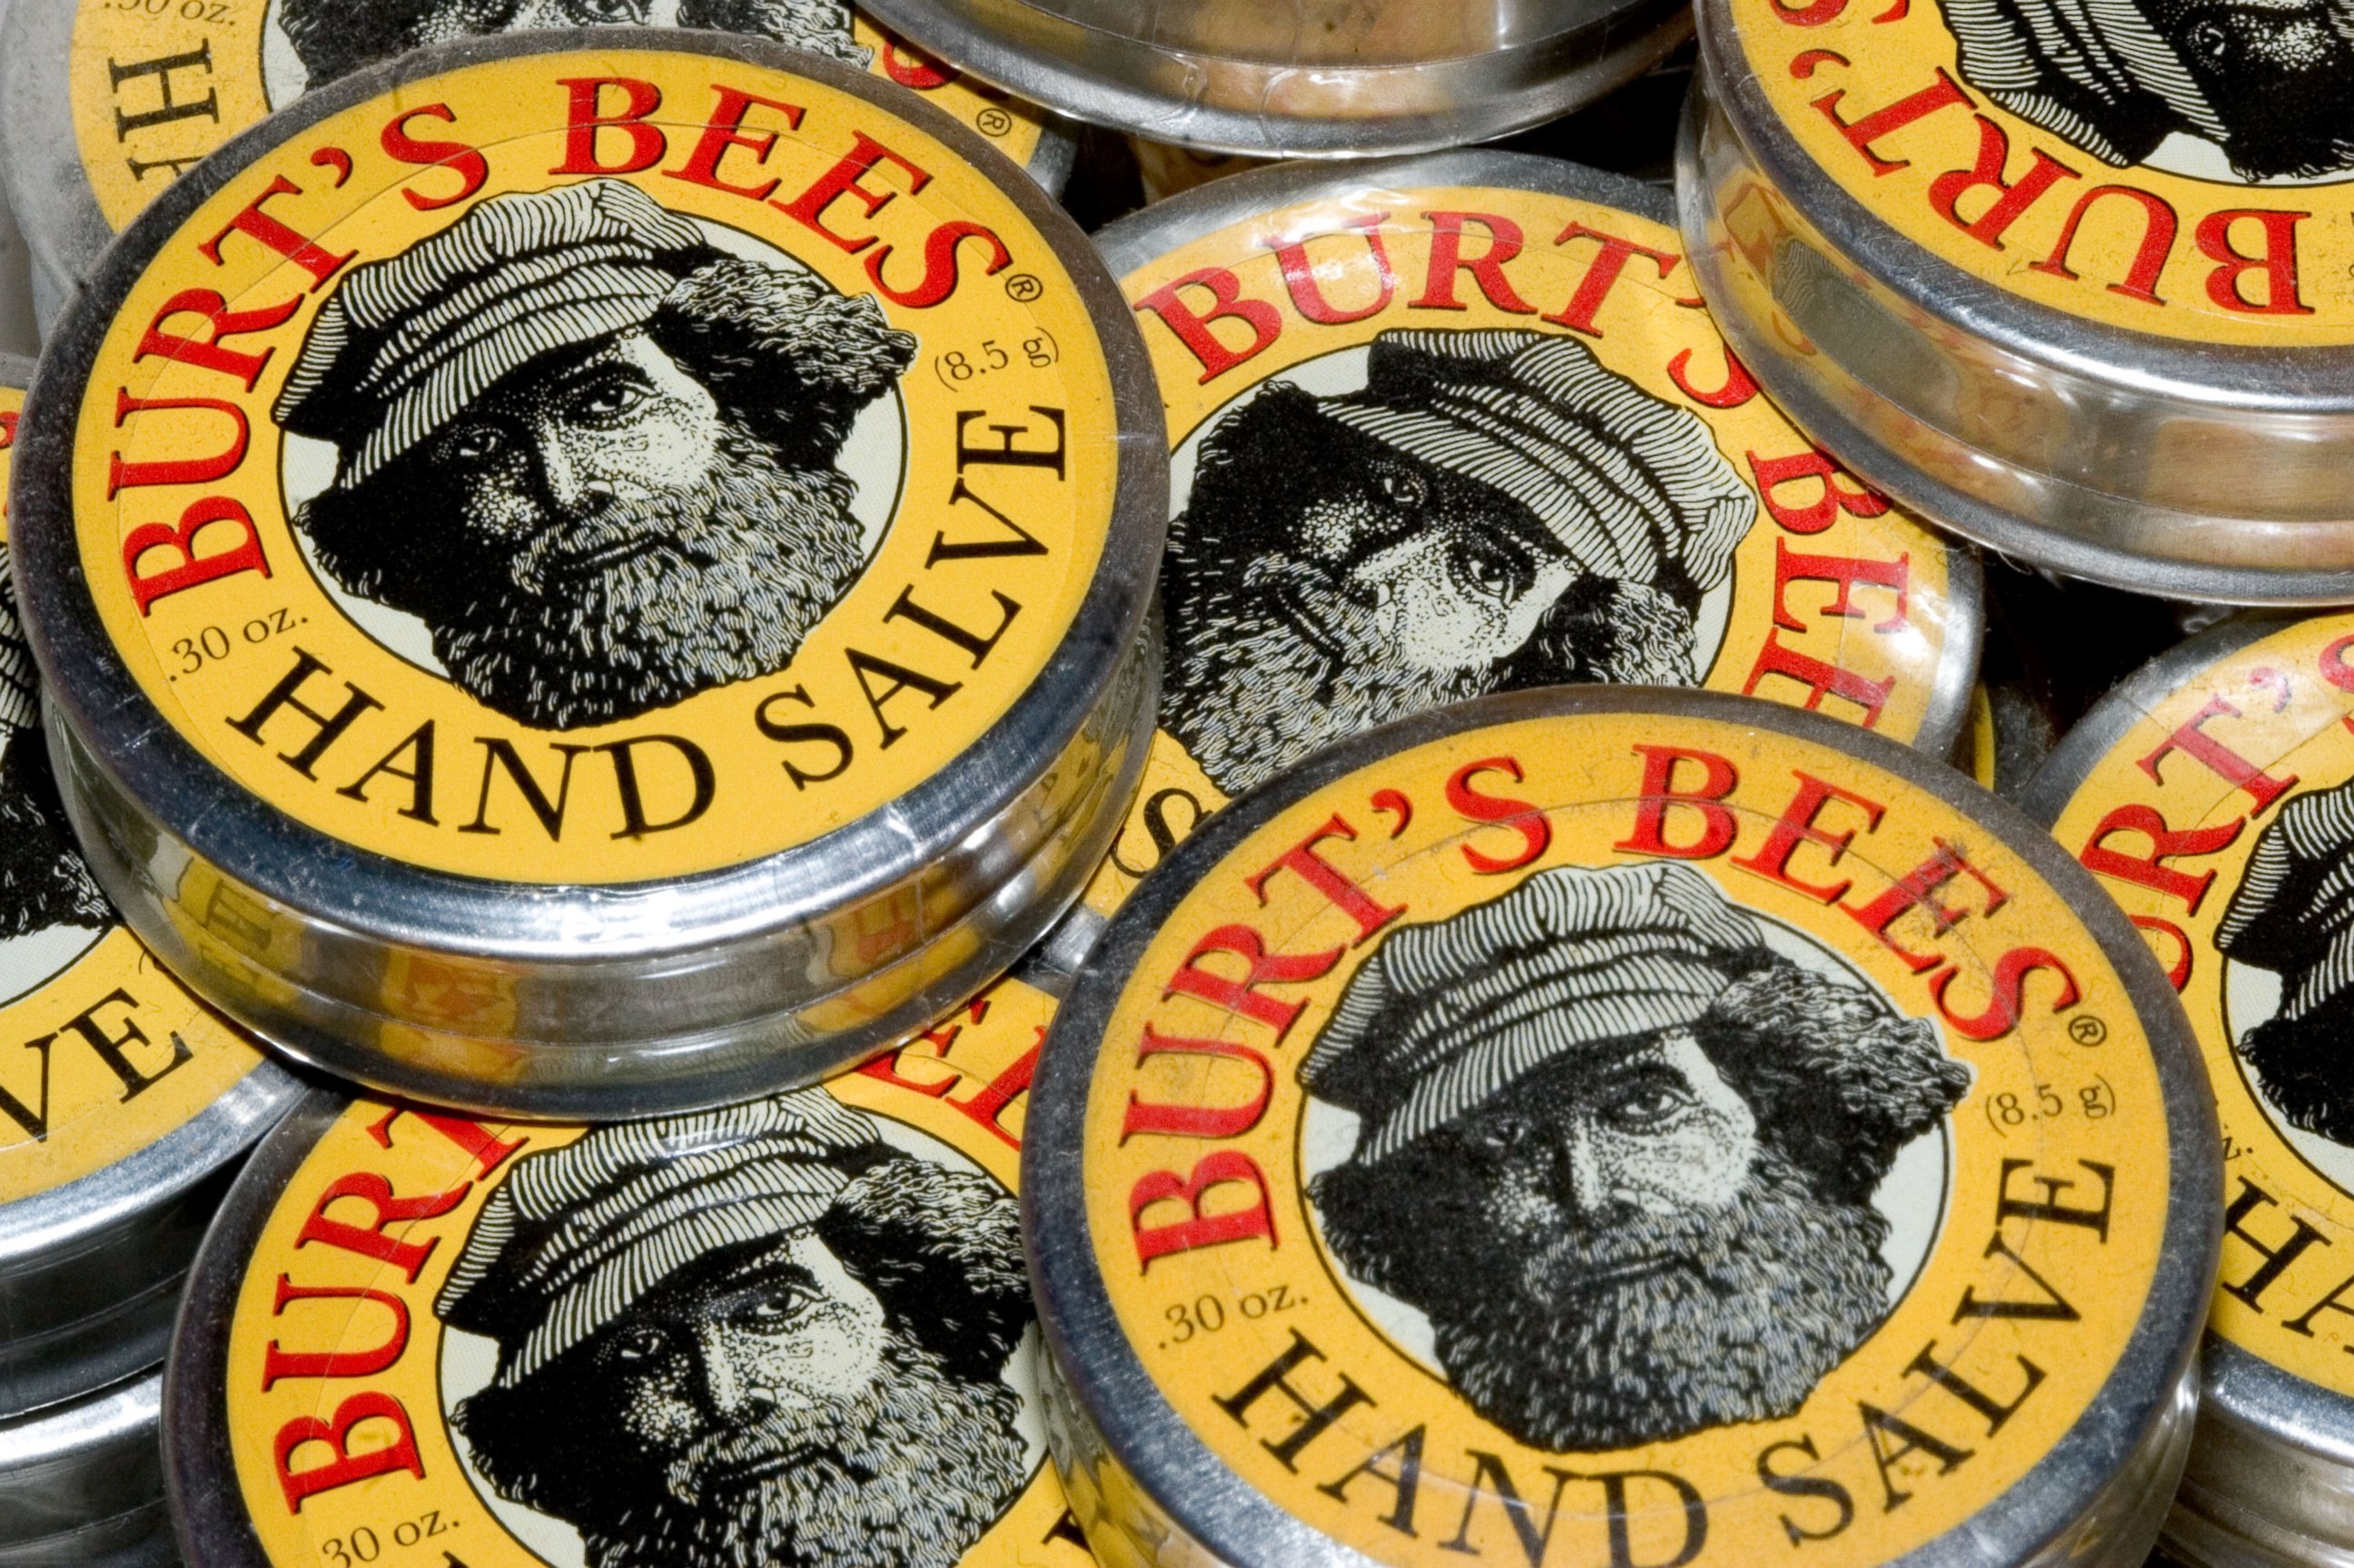 PHOTO: Burt's Bees hand salve is pictured in New York City on Oct. 31, 2007. 